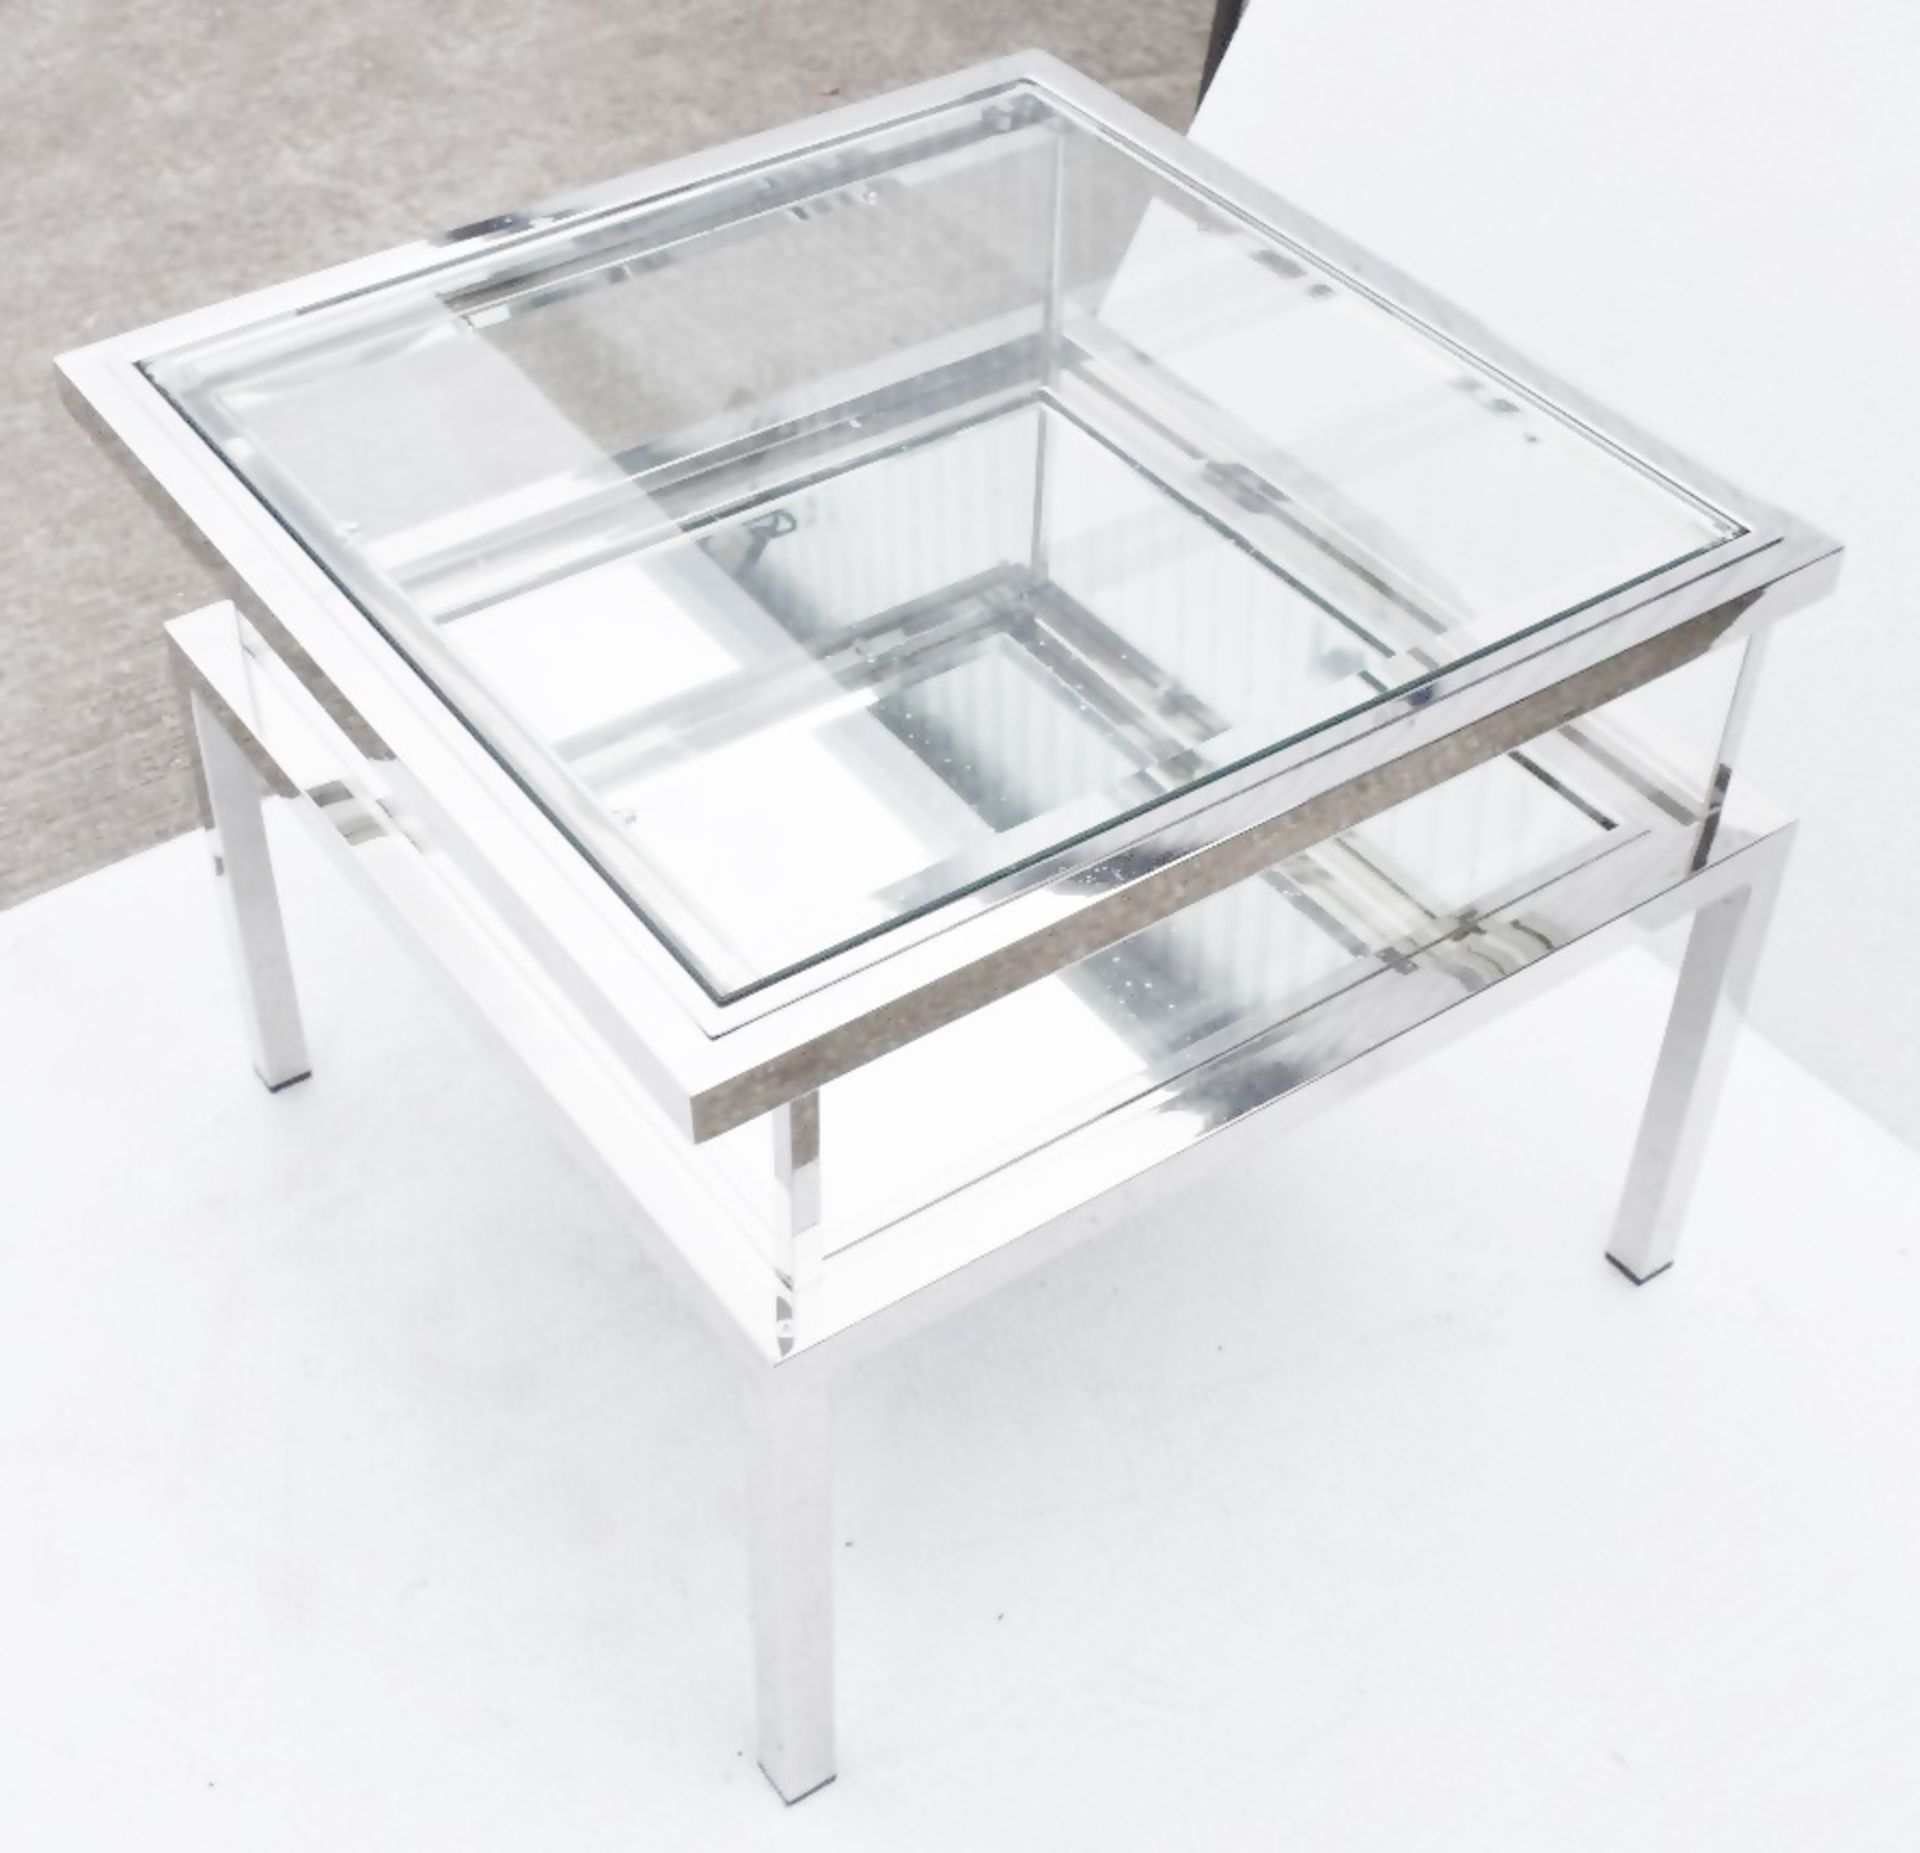 1 x EICHHOLTZ Glass Topped Side Table Harvey With A Polished Steel Frame - Image 3 of 5